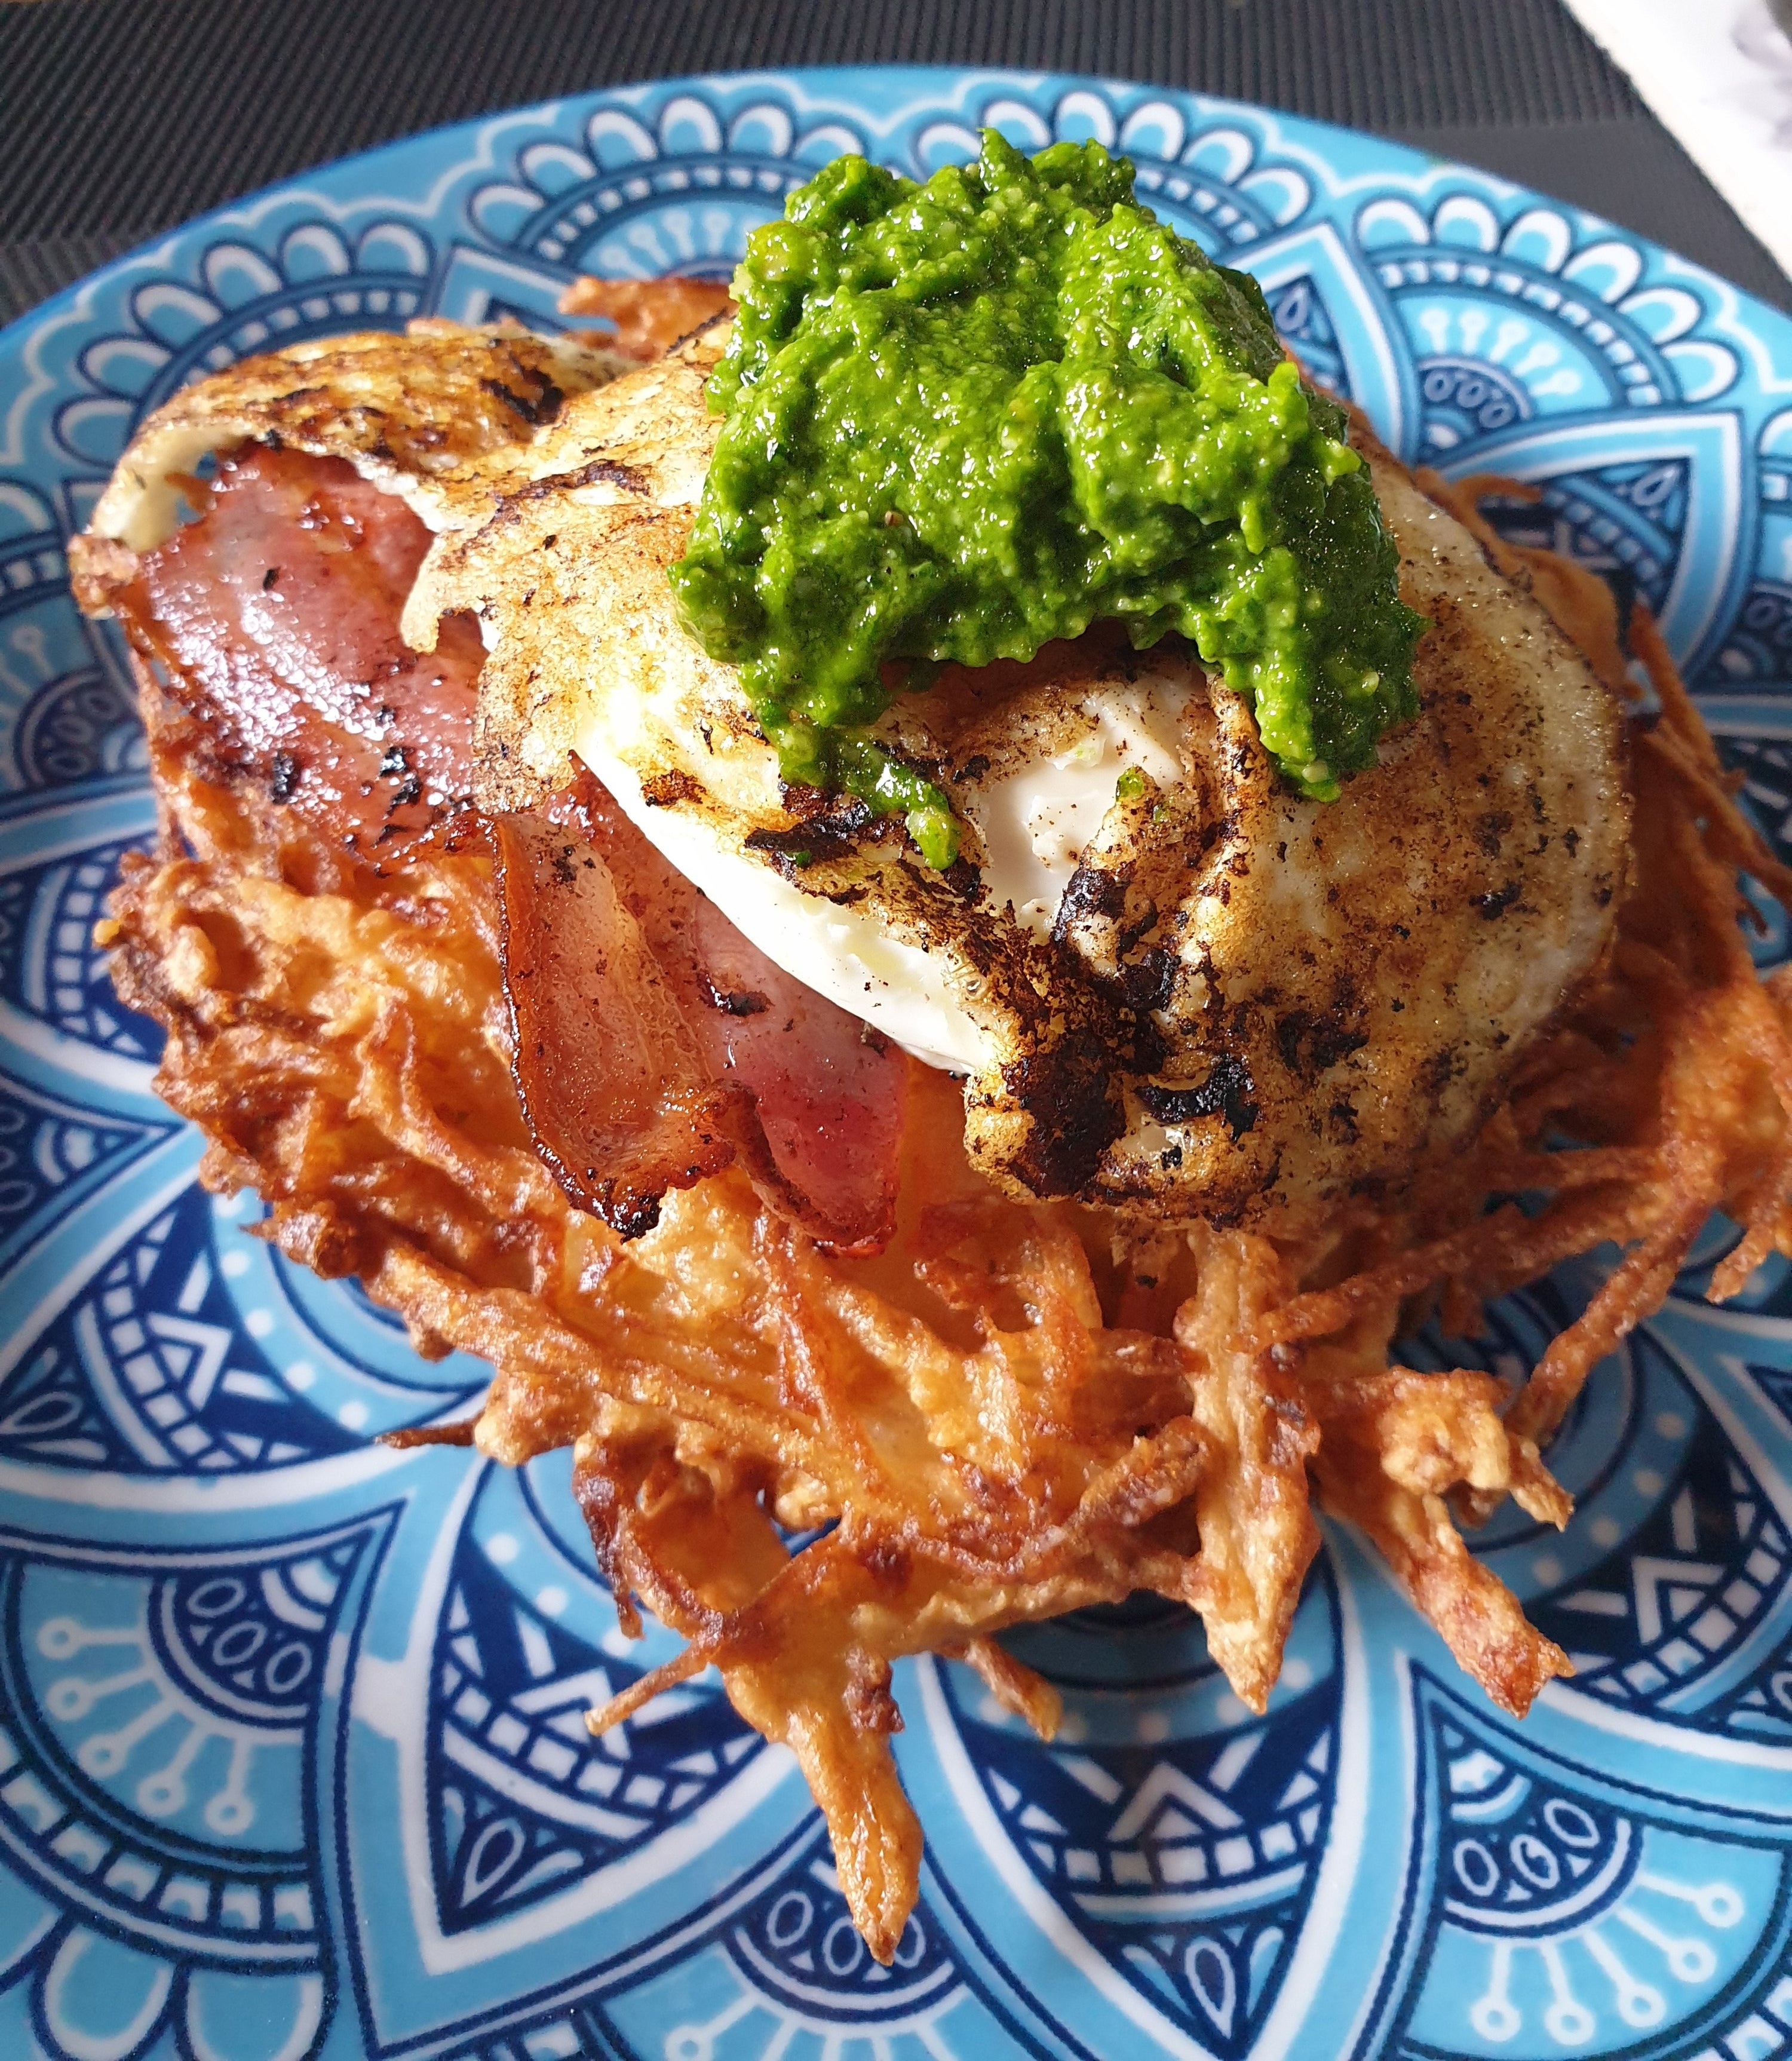 Home made hash brown with bacon, egg and home made pesto